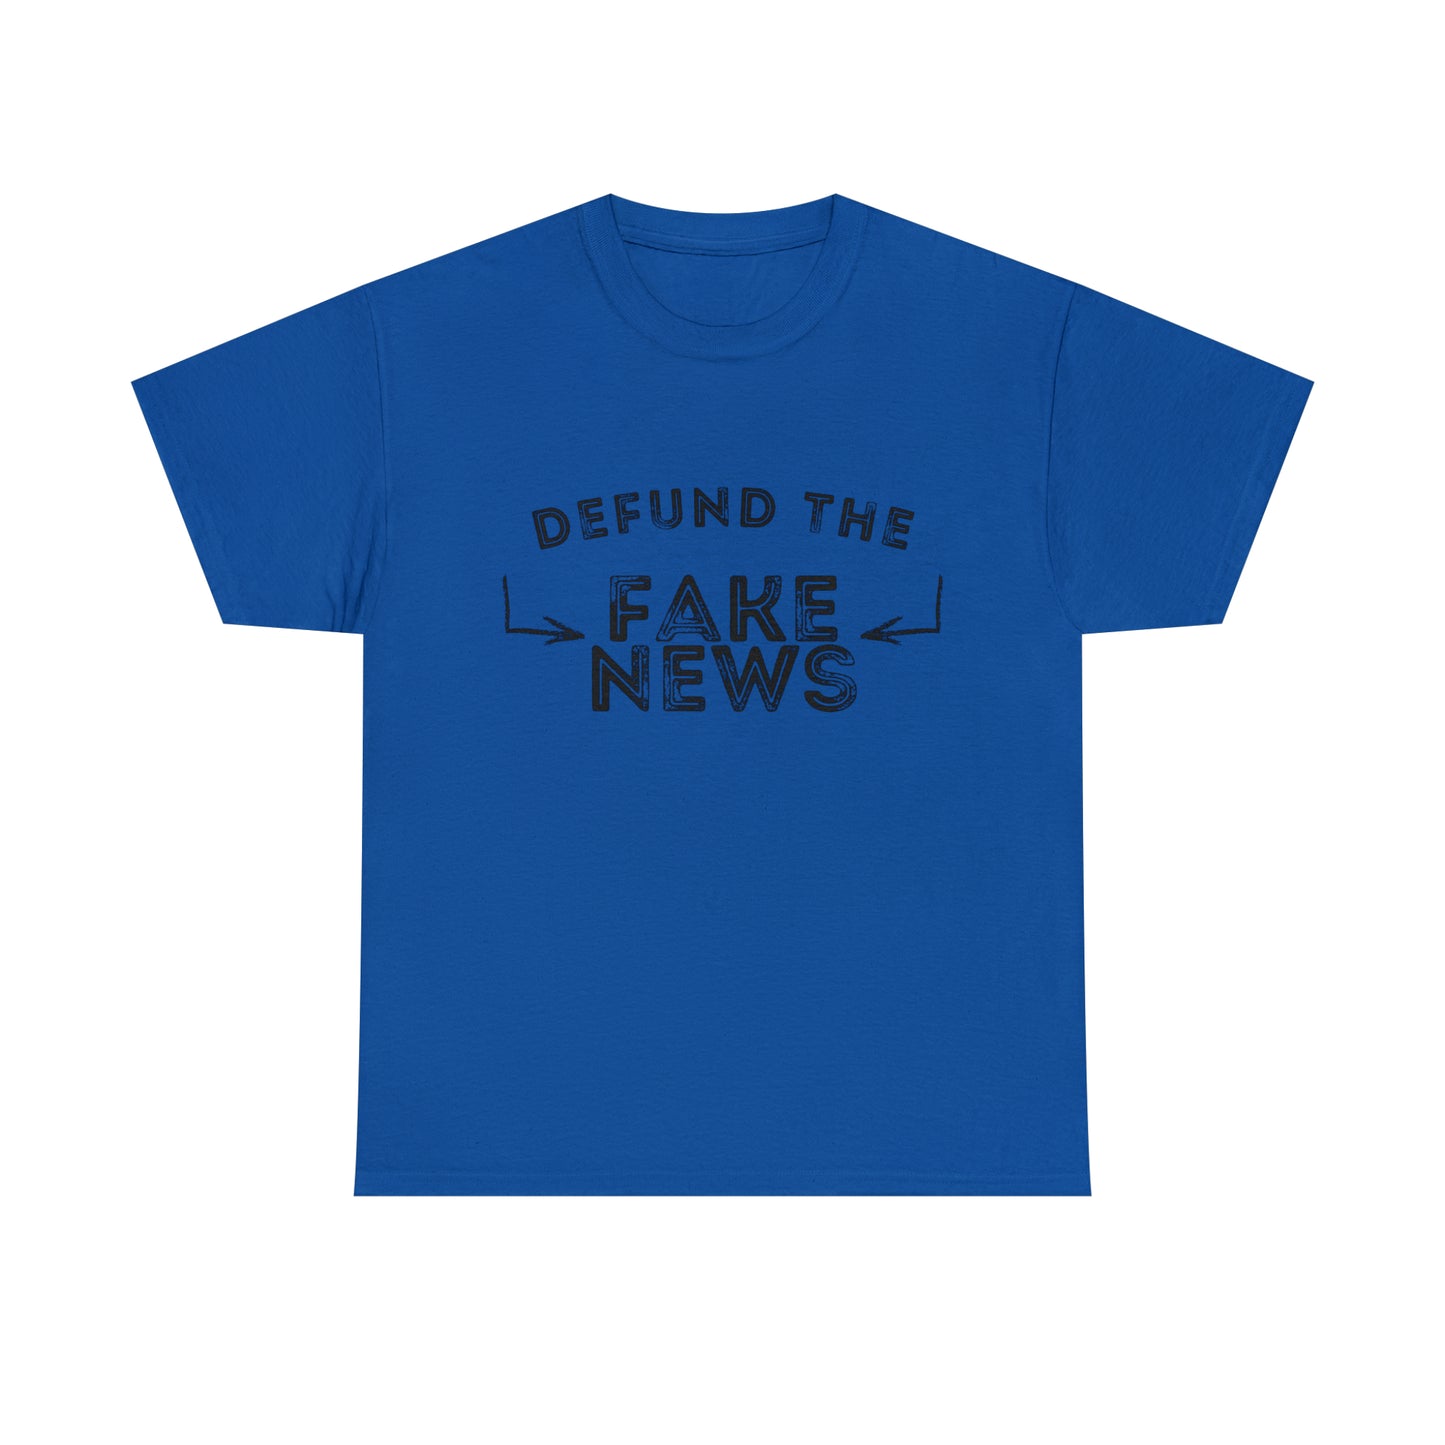 "Bold statement shirt against biased reporting"